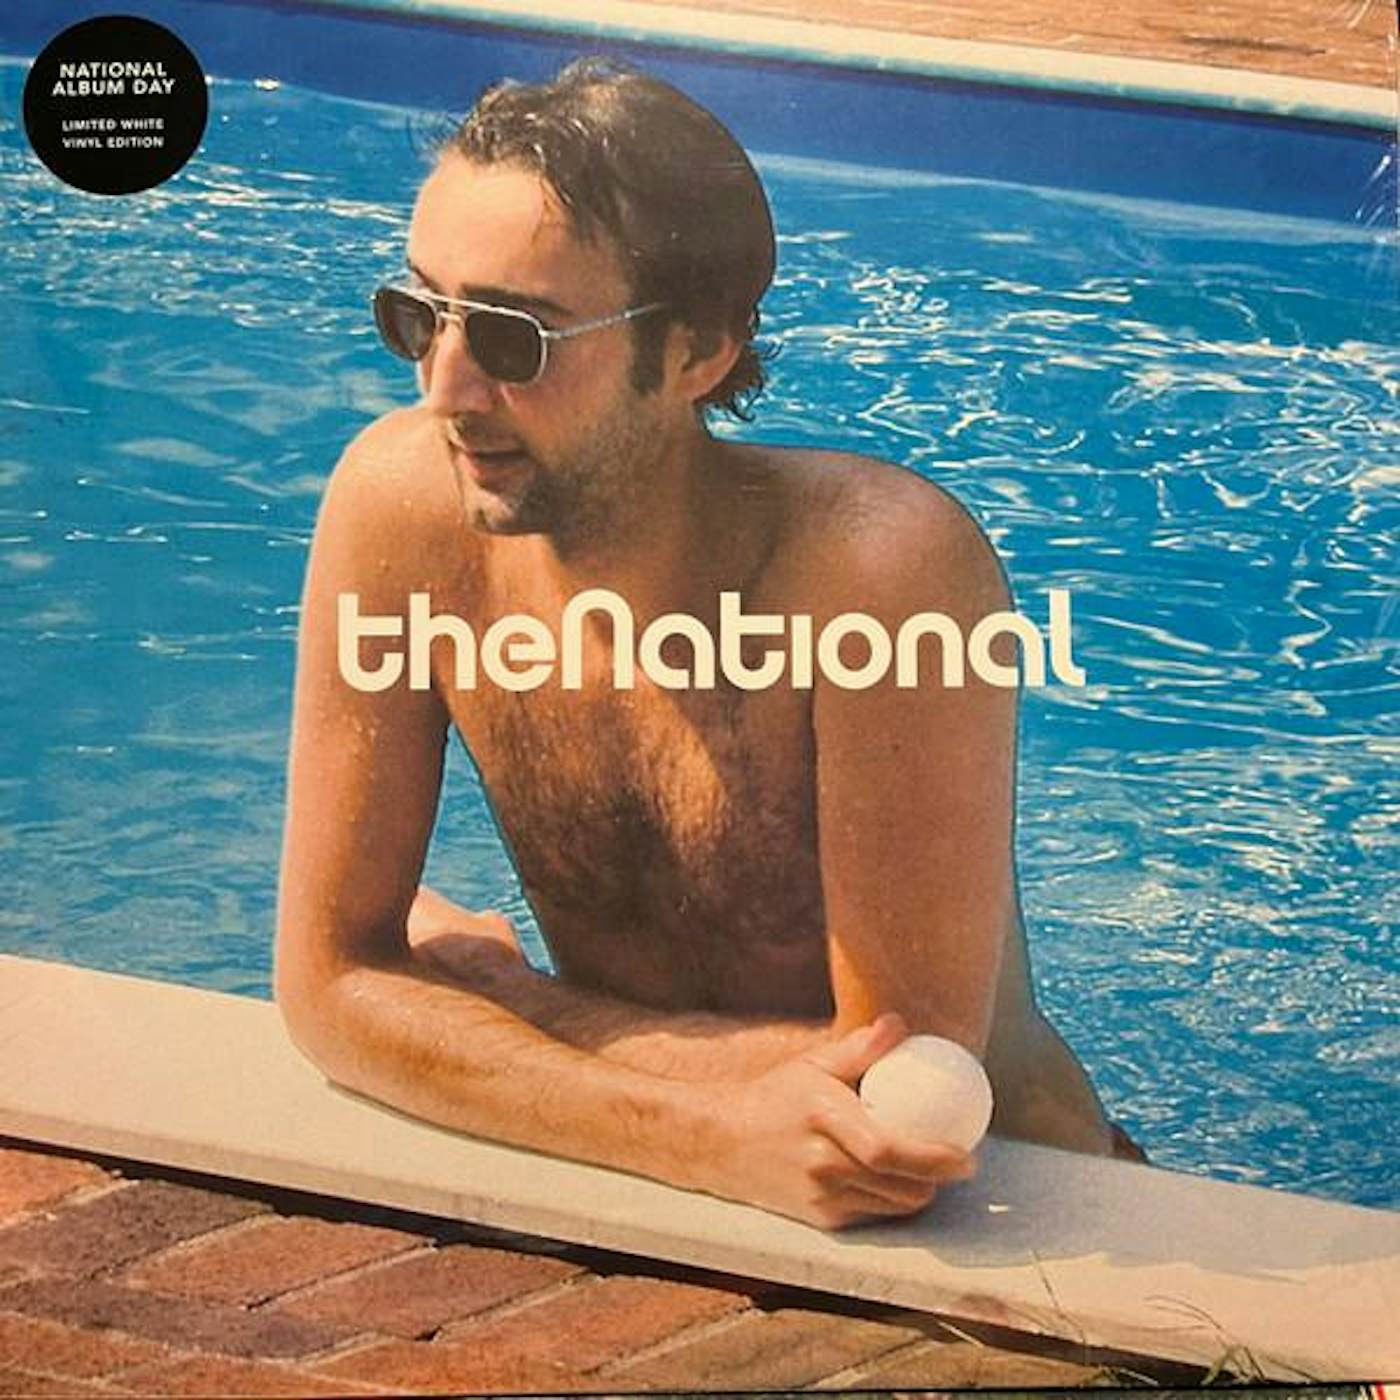 The National Vinyl Record